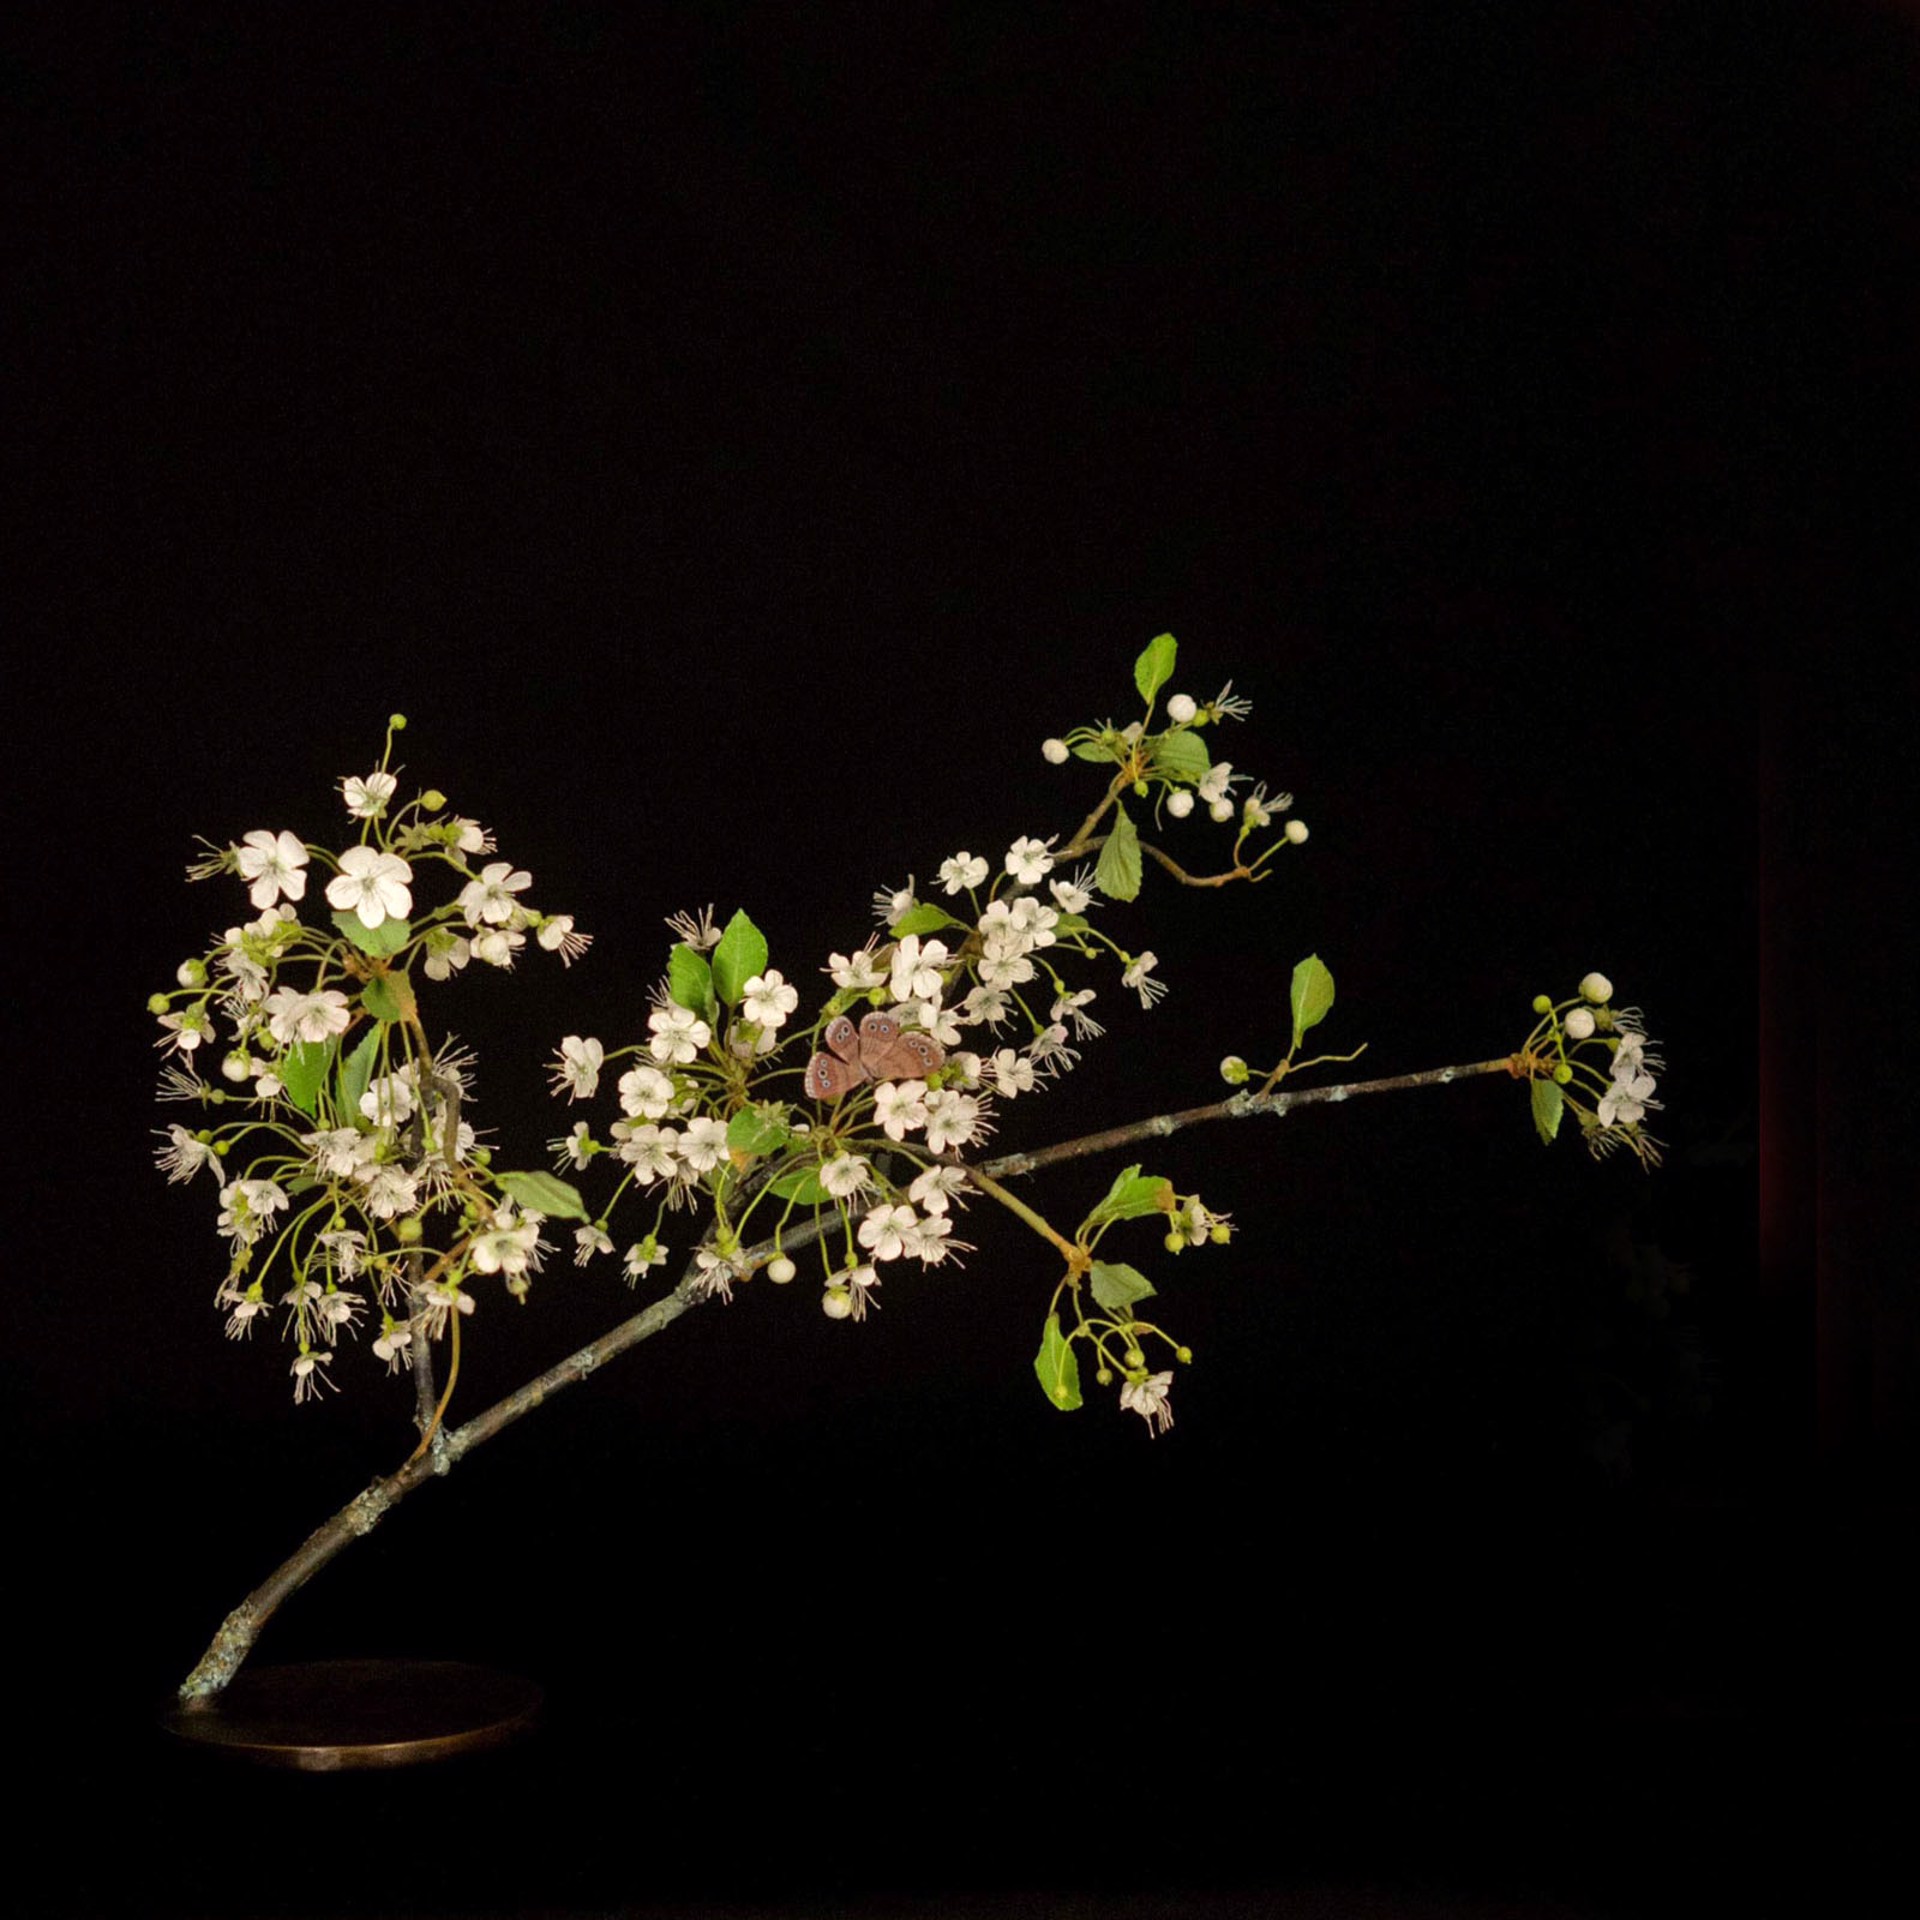 PEAR BLOSSOM BRANCH WITH WOOD SATYR by Carmen Almon